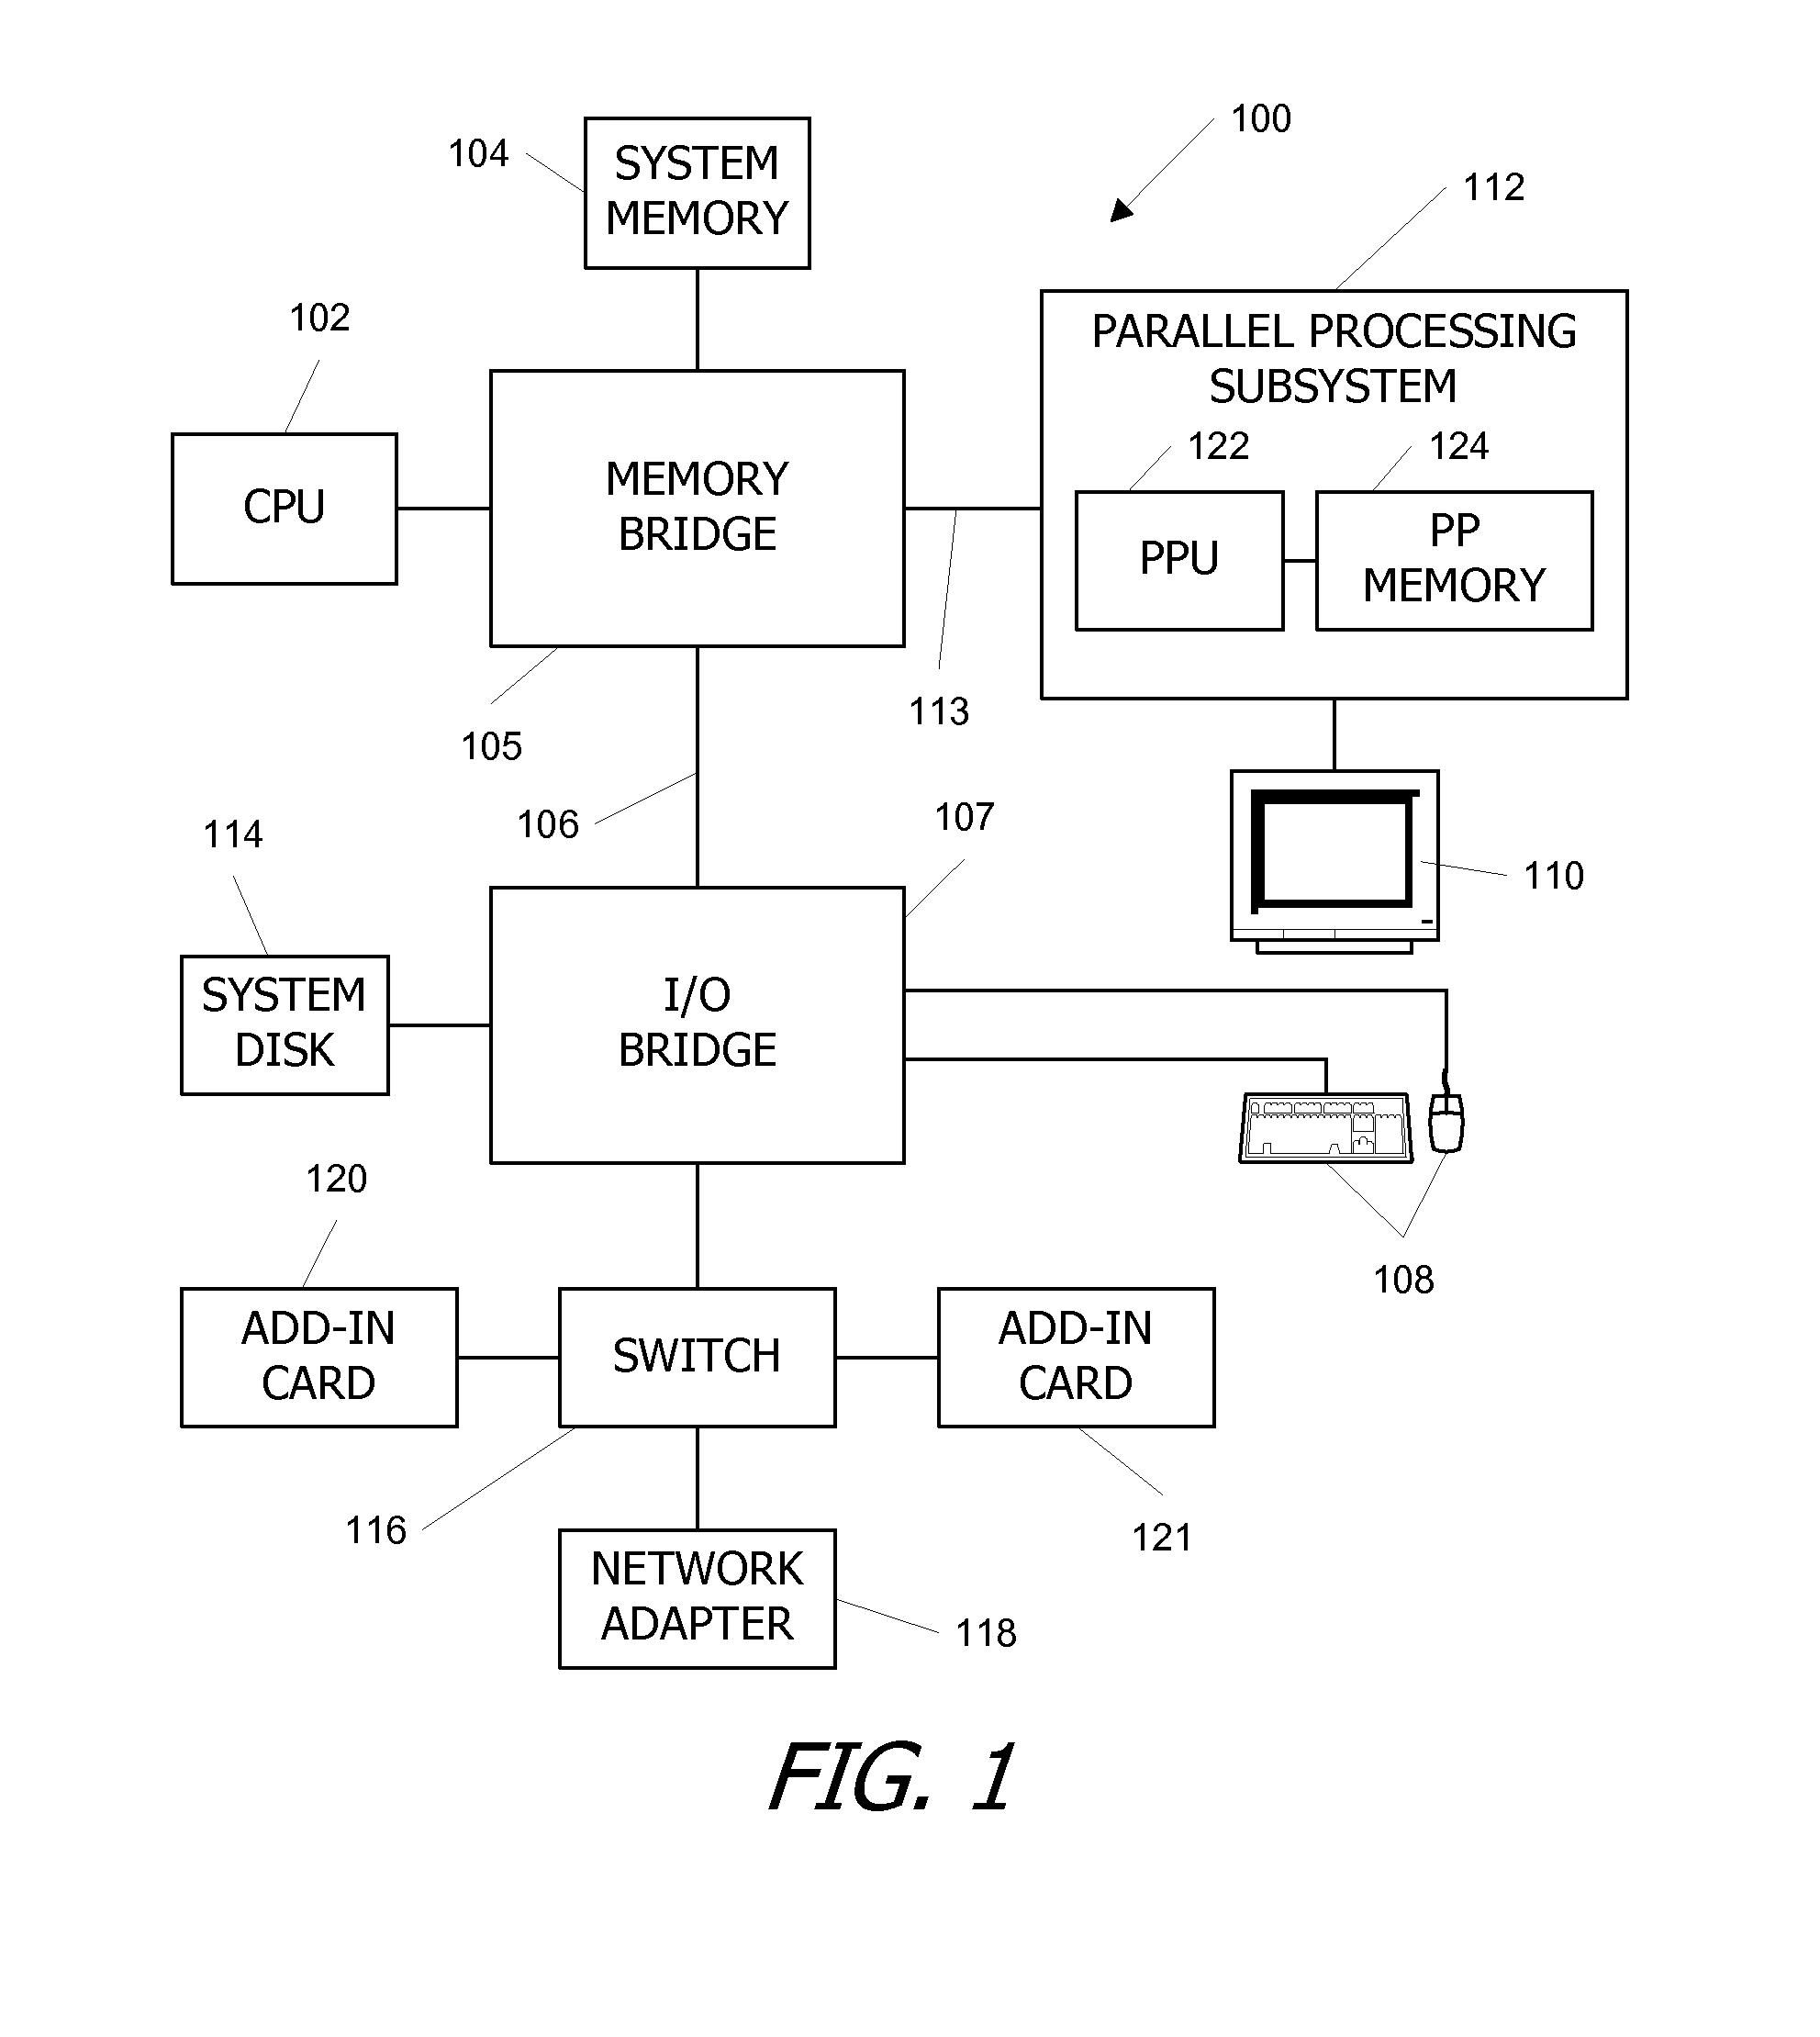 Virtual architecture and instruction set for parallel thread computing